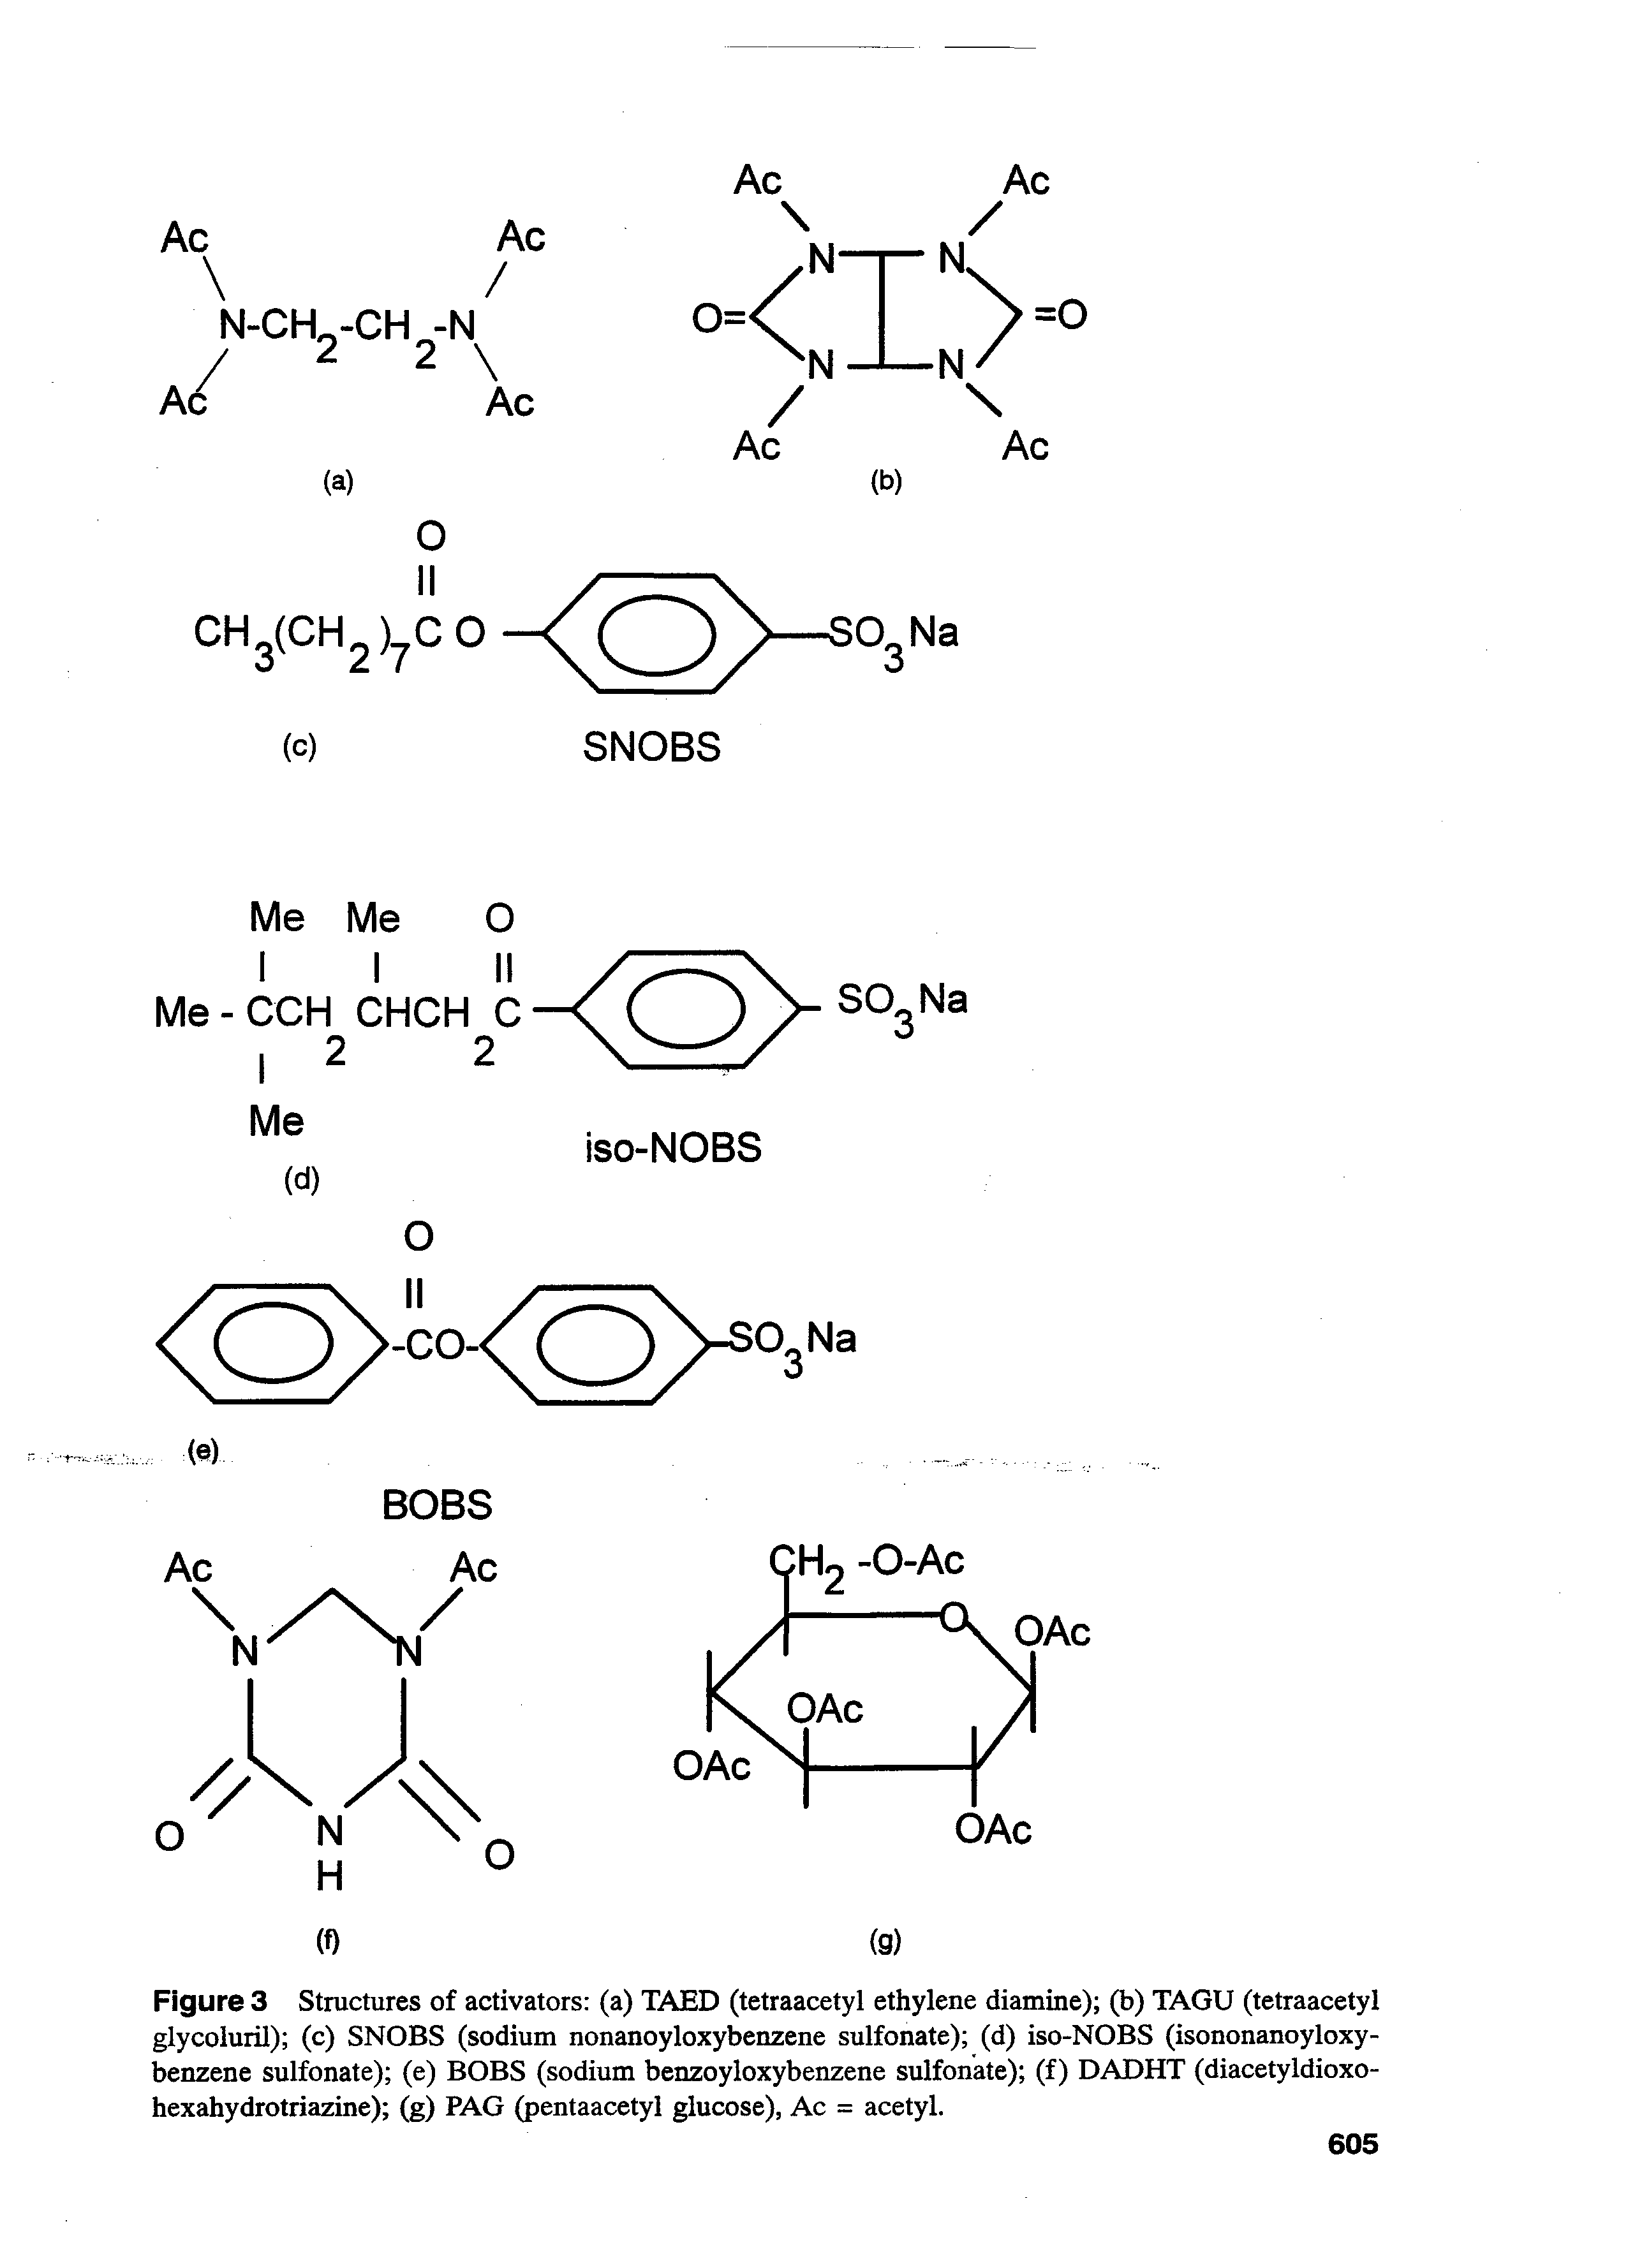 Figure 3 Structures of activators (a) TAED (tetraacetyl ethylene diamine) (b) TAGU (tetraacetyl glycoluril) (c) SNOBS (sodium nonanoyloxybenzene sulfonate) (d) iso-NOBS (isononanoyloxy-benzene sulfonate) (e) BOBS (sodium benzoyloxybenzene sulfonate) (f) DADHT (diacetyldioxo-hexahydrotriazine) (g) PAG (pentaacetyl glucose), Ac = acetyl.